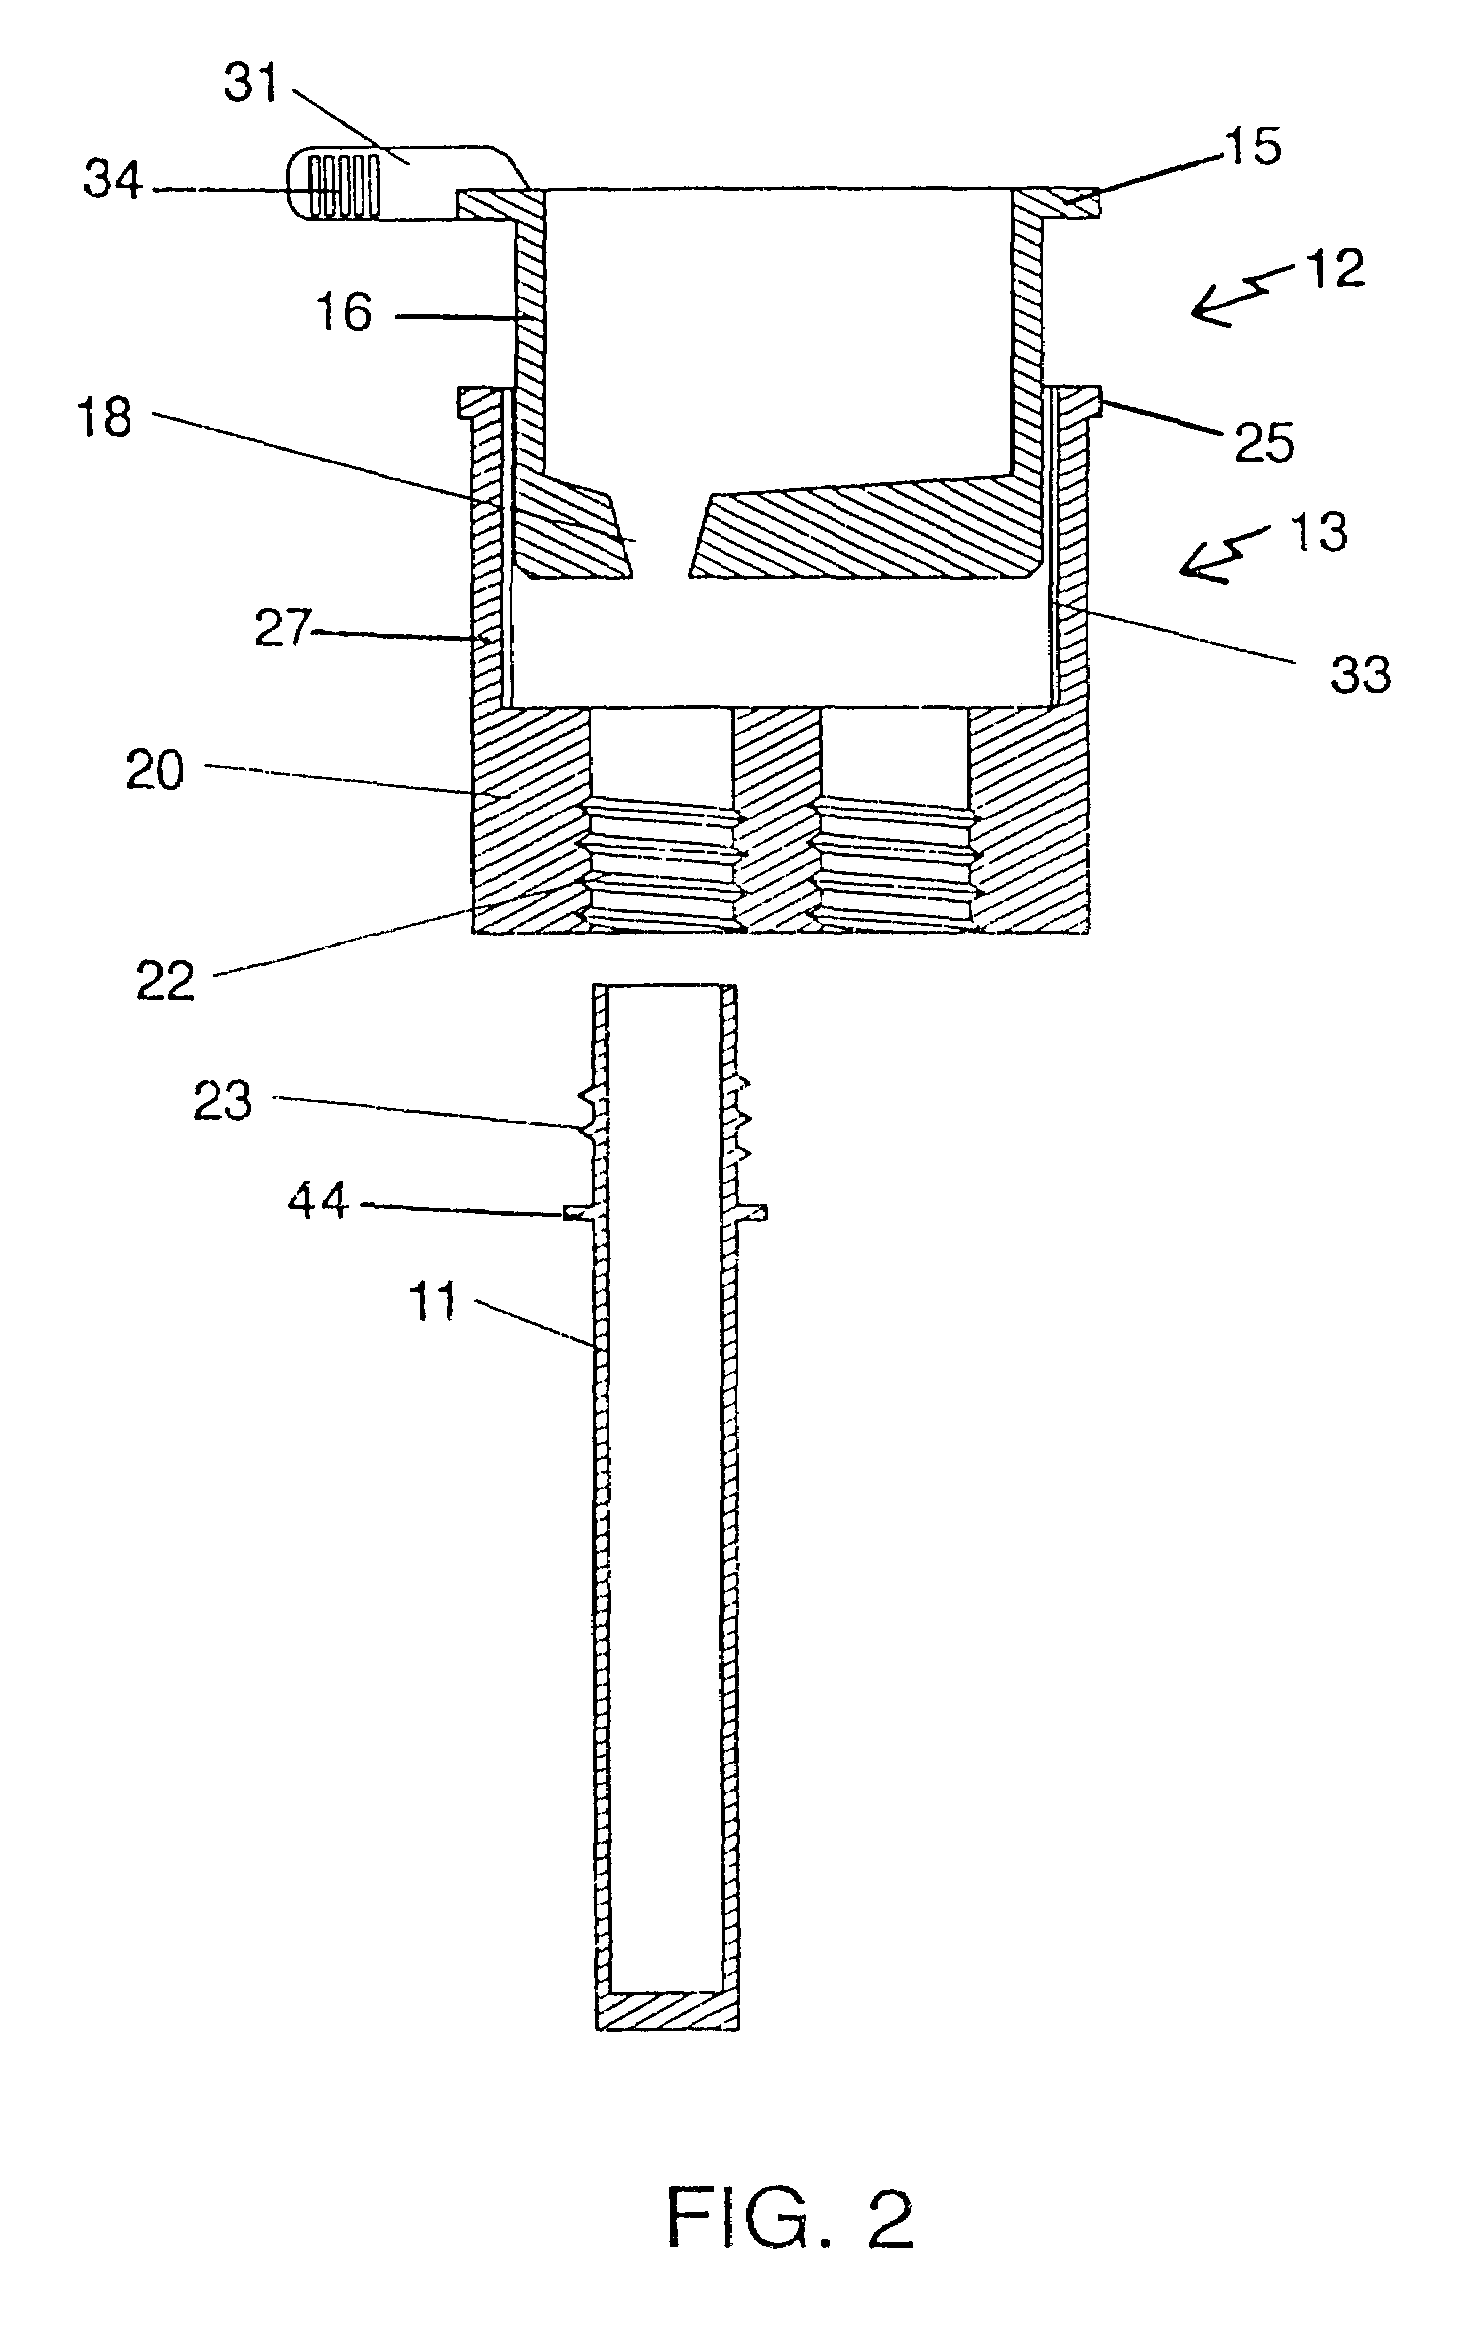 Lumbar puncture fluid collection device